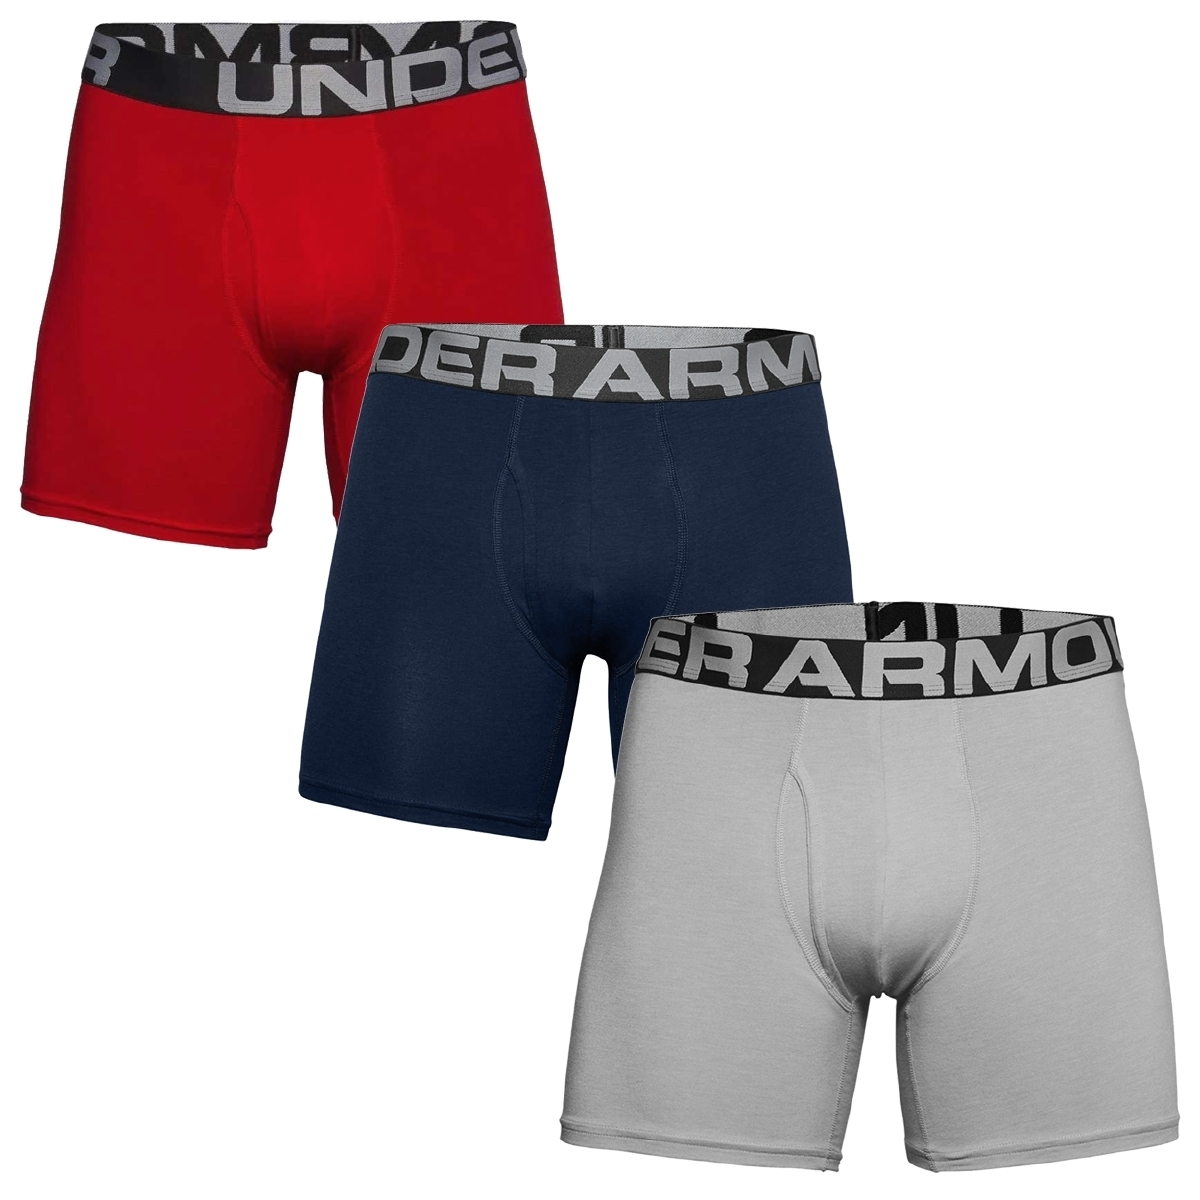 Боксеры Under Armour Boxershorts Charged Cotton 6in 3 Pack, разноцветный трусы мужские under armour charged cotton 6in 3 pack размер 46 48 3 шт 1363617 001